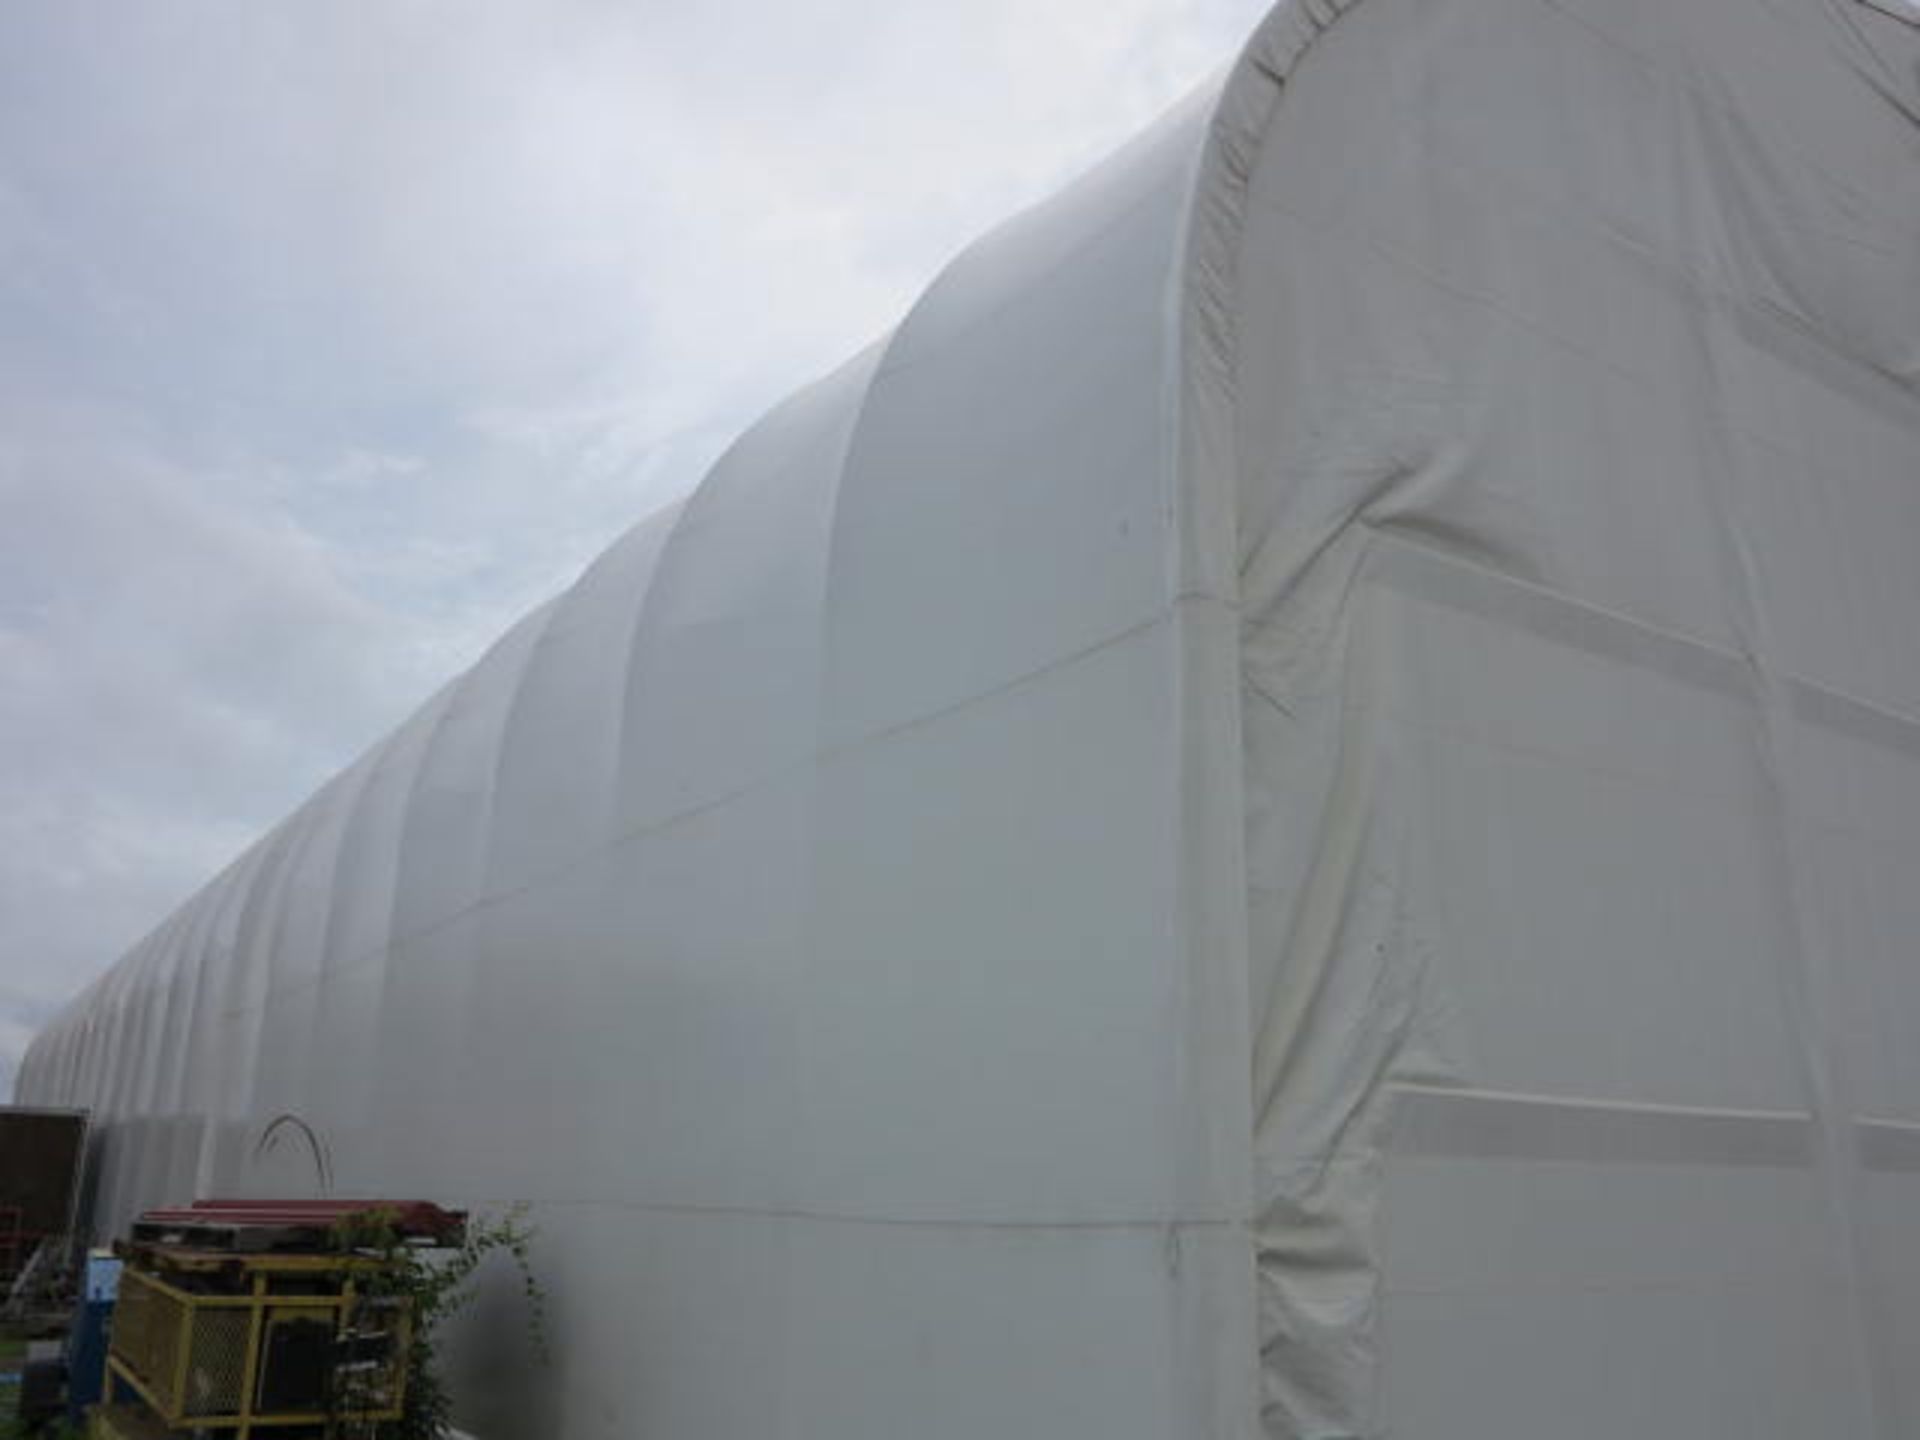 50' Quonset Hut with Prefabricated Structural Hardware, Fabric Covering, Nuts and Bolts, Vents, - Image 15 of 17